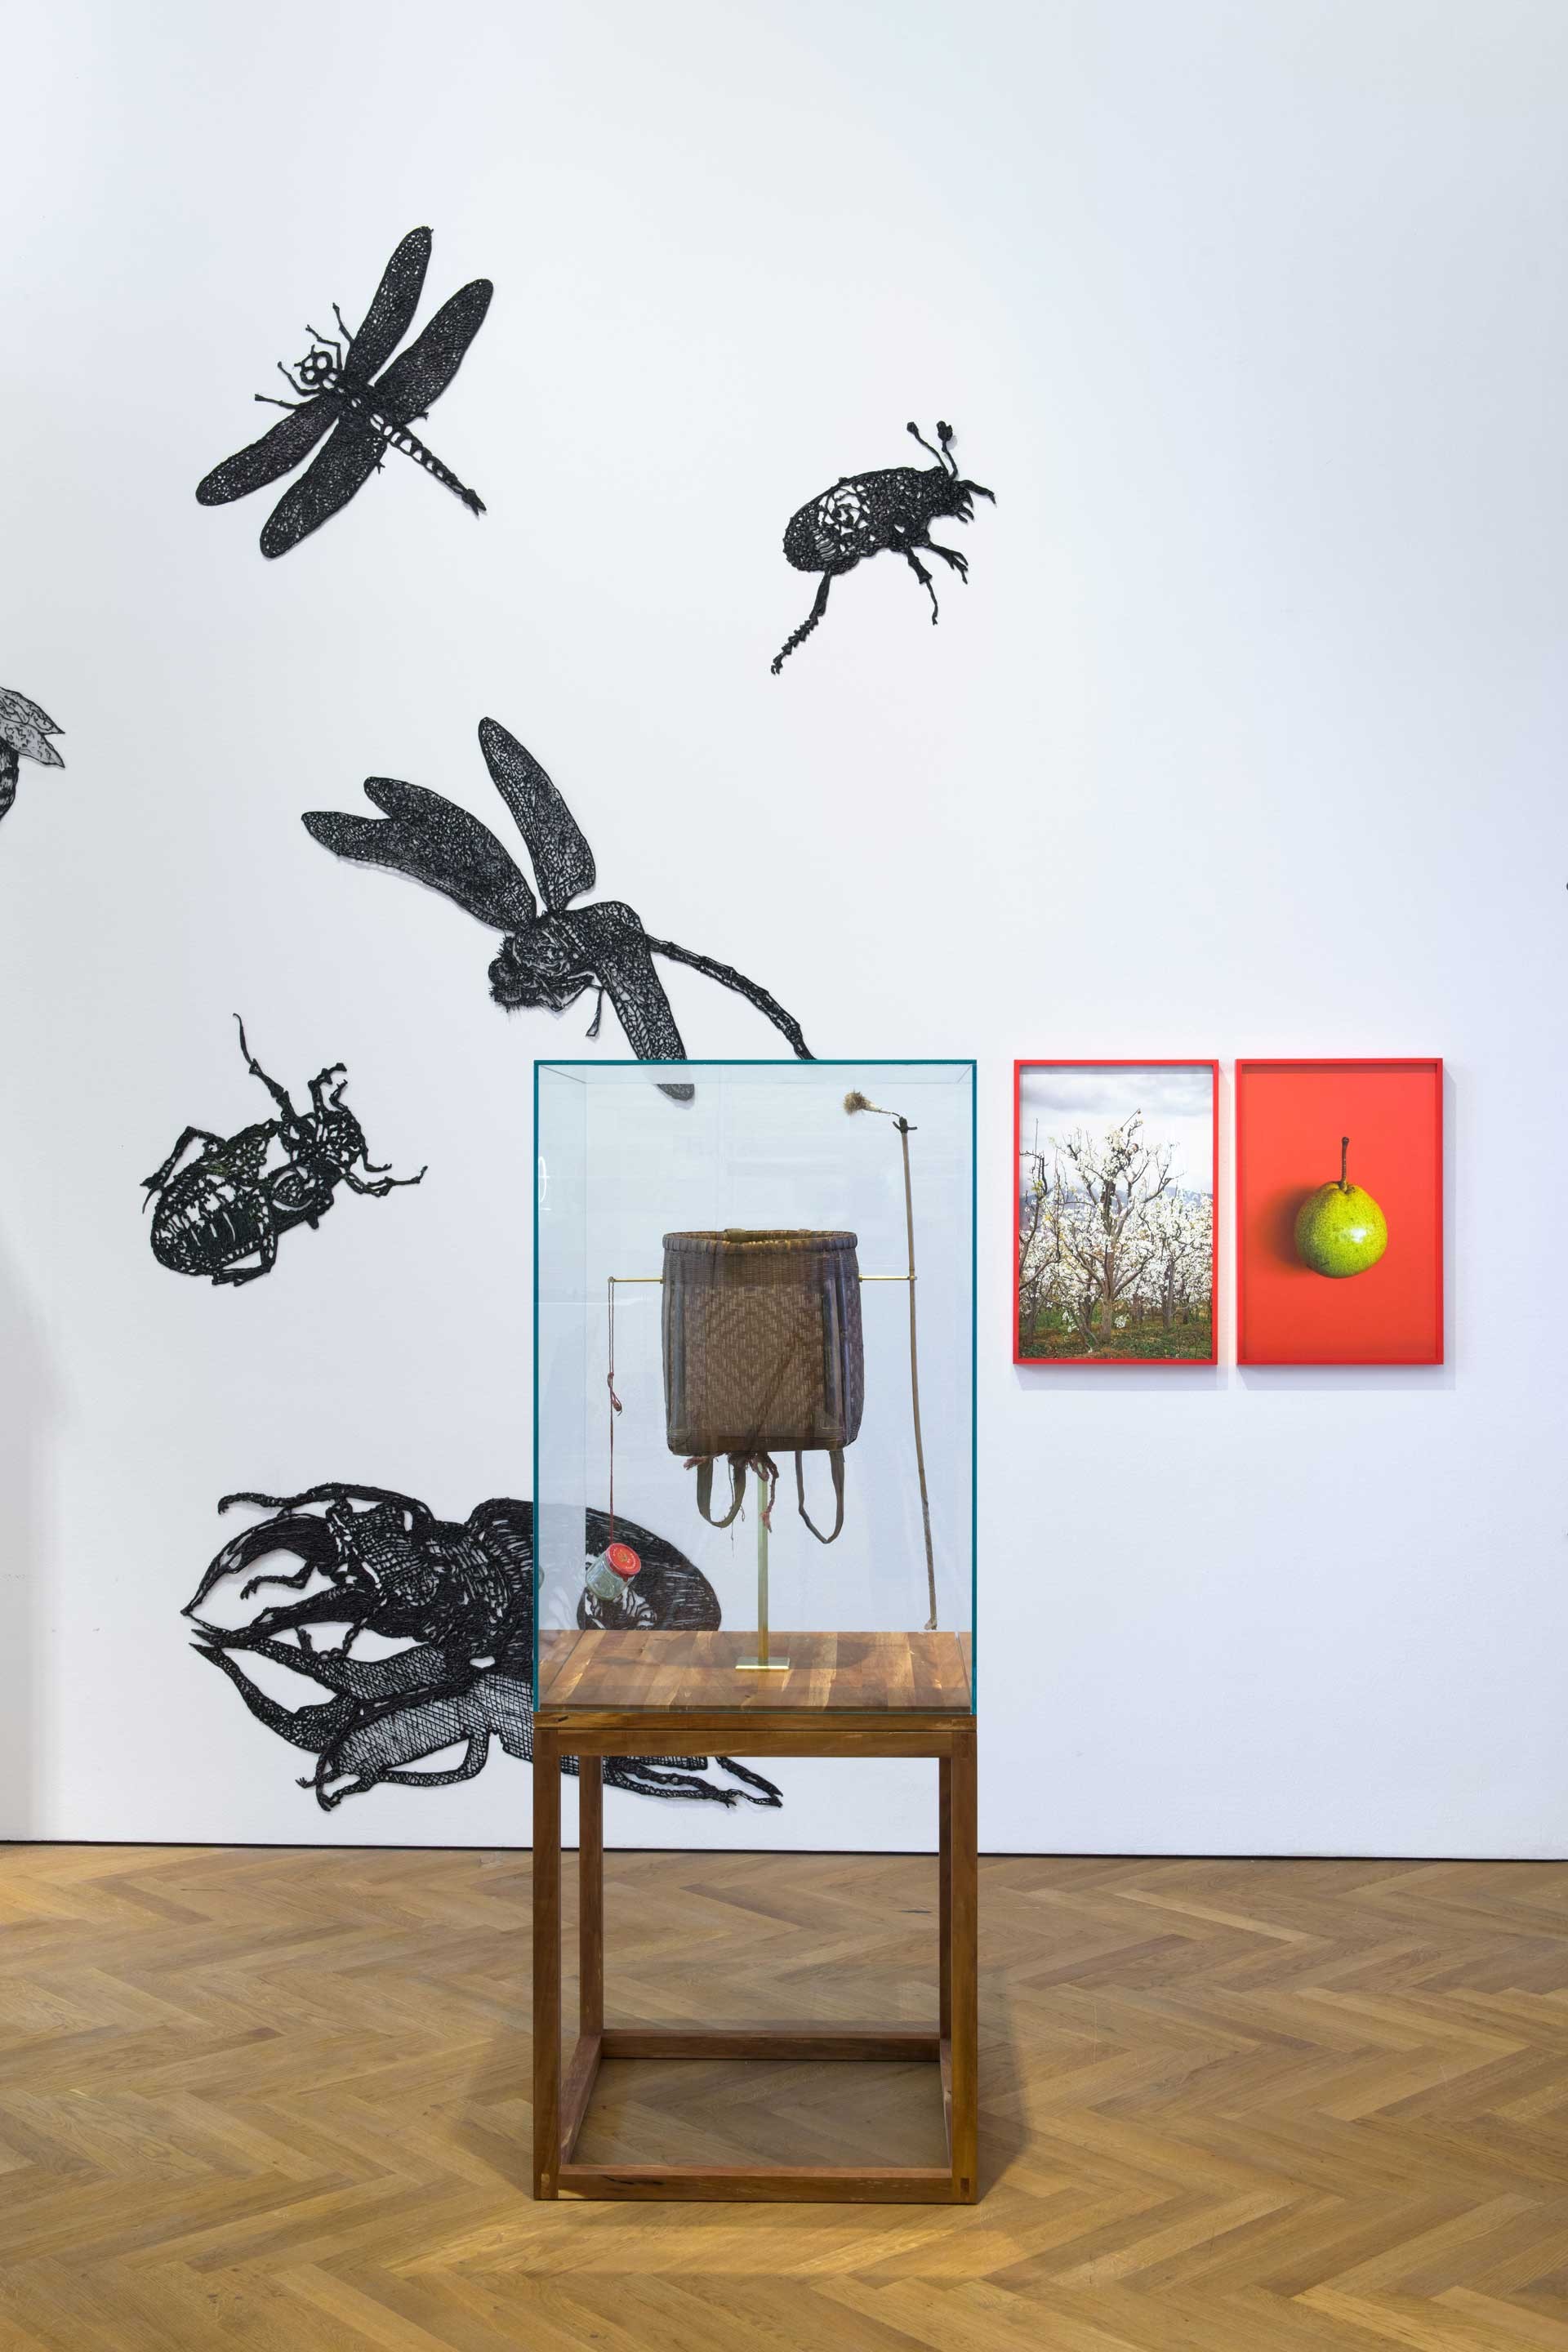 <BODY><div>Exhibition View</div><div>CLIMATE CARE</div><div>Reimagining Shared Planetary Futures</div><div>in the front: Maximilian Prüfer, A Gift From Him, 2019</div><div>© Stefan Lux/MAK</div></BODY>